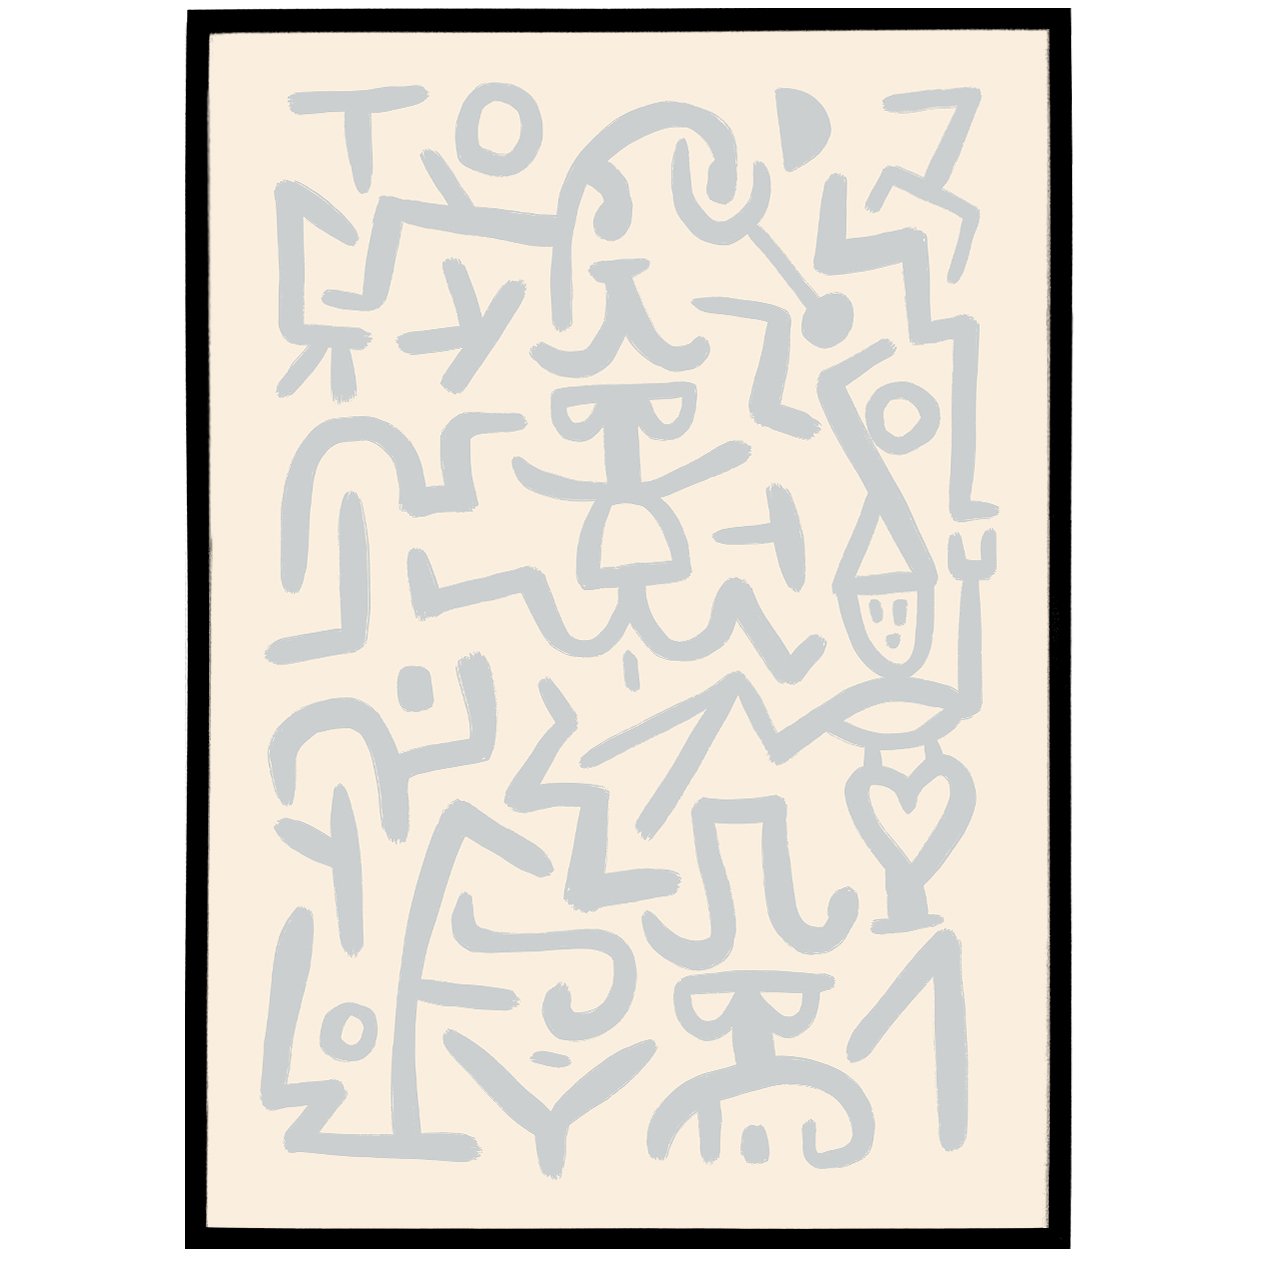 Paul Klee Monochrome Abstract Poster